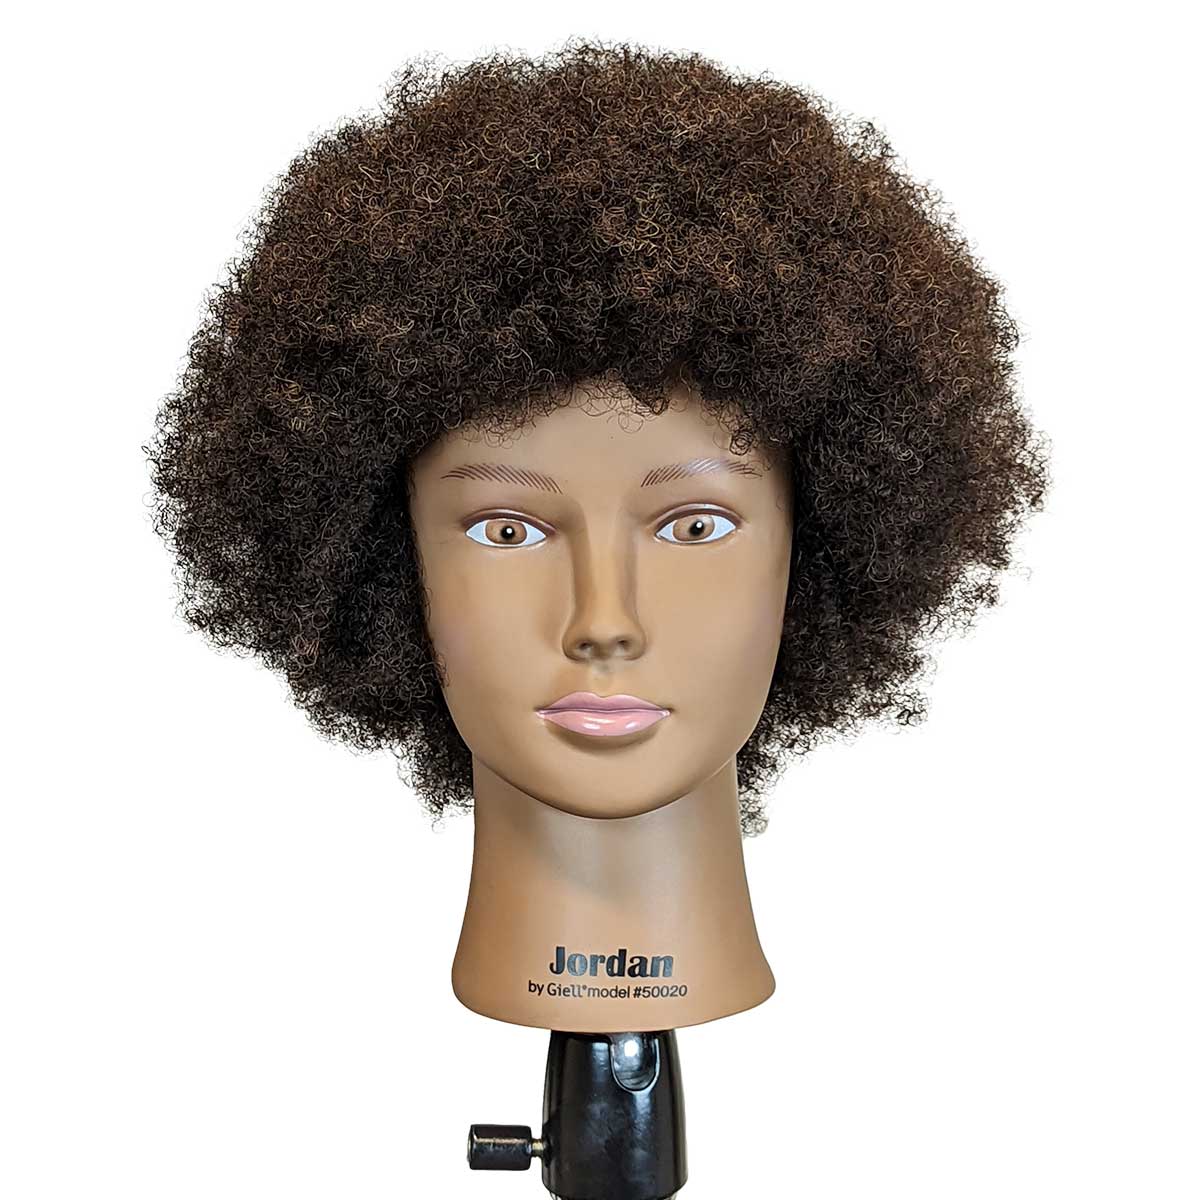 Jordan 16" Afro Style Black 100% Human Hair Cosmetology Mannequin Head by Giell